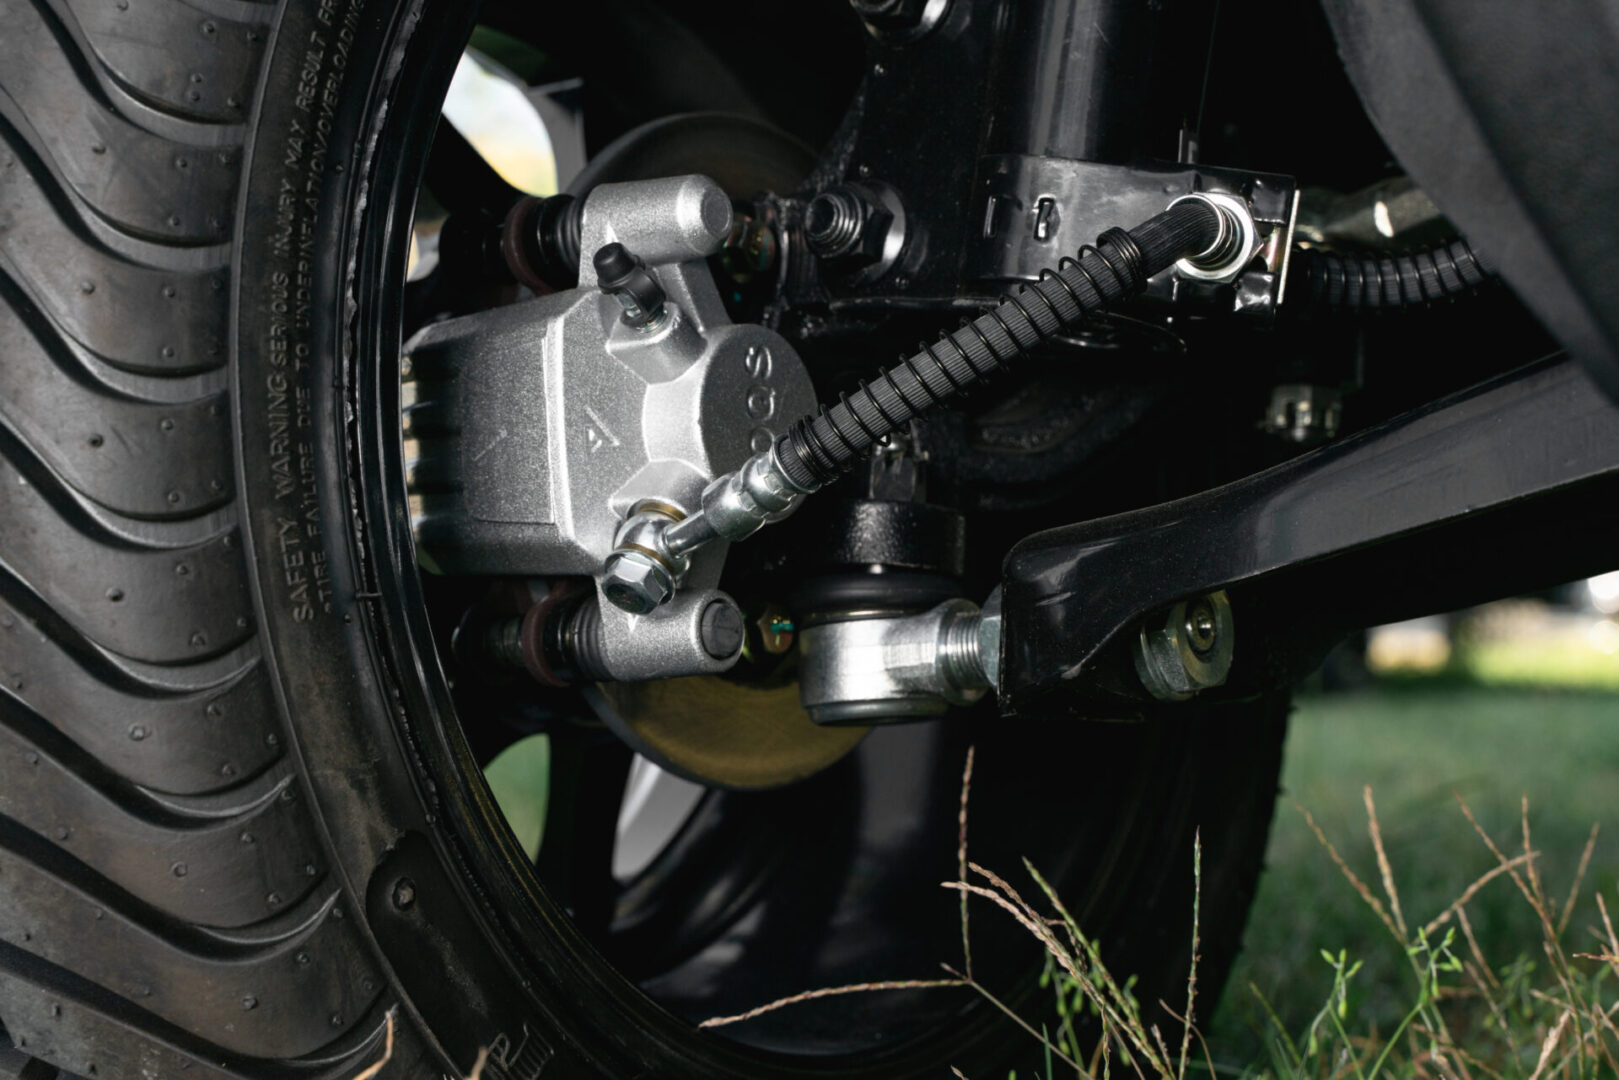 A close up of the front wheel on a motorcycle.